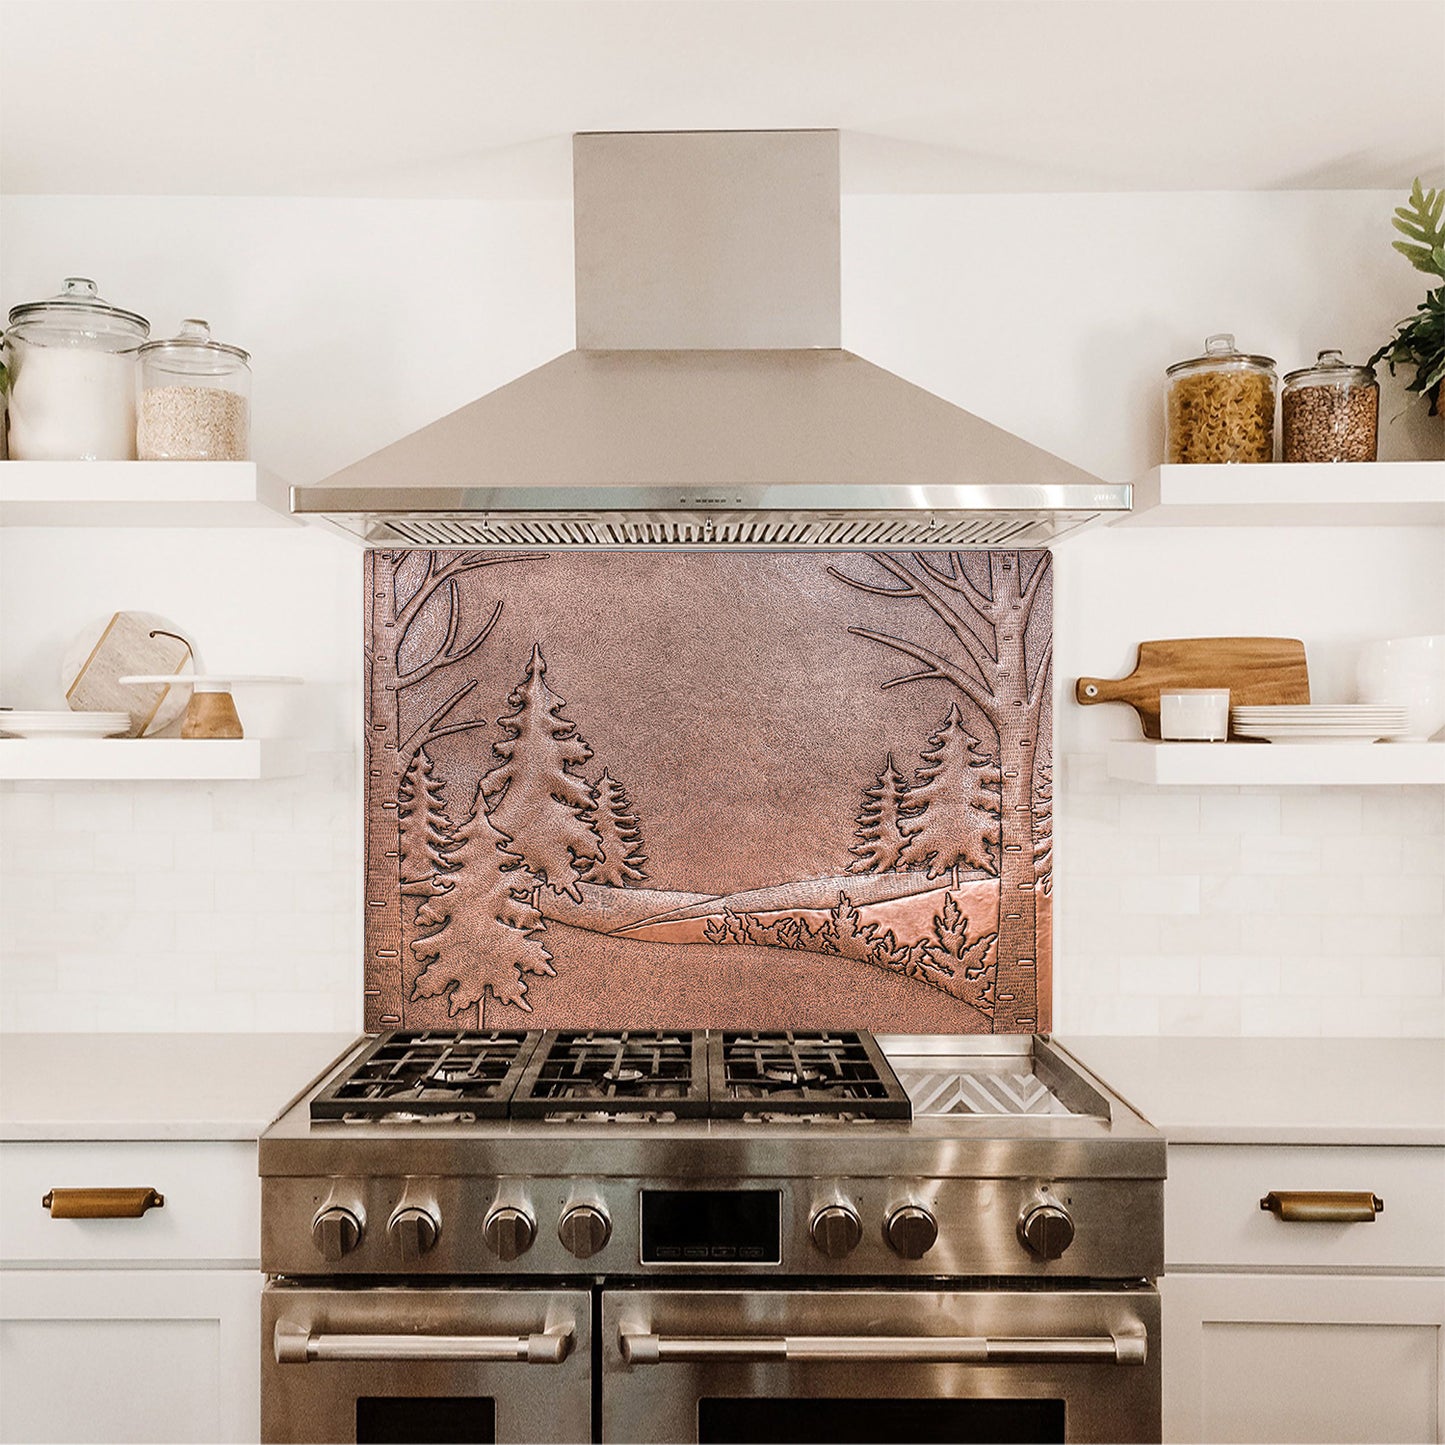 Custom Copper Kitchen Tile - Enchanted Pine and Birch Forest